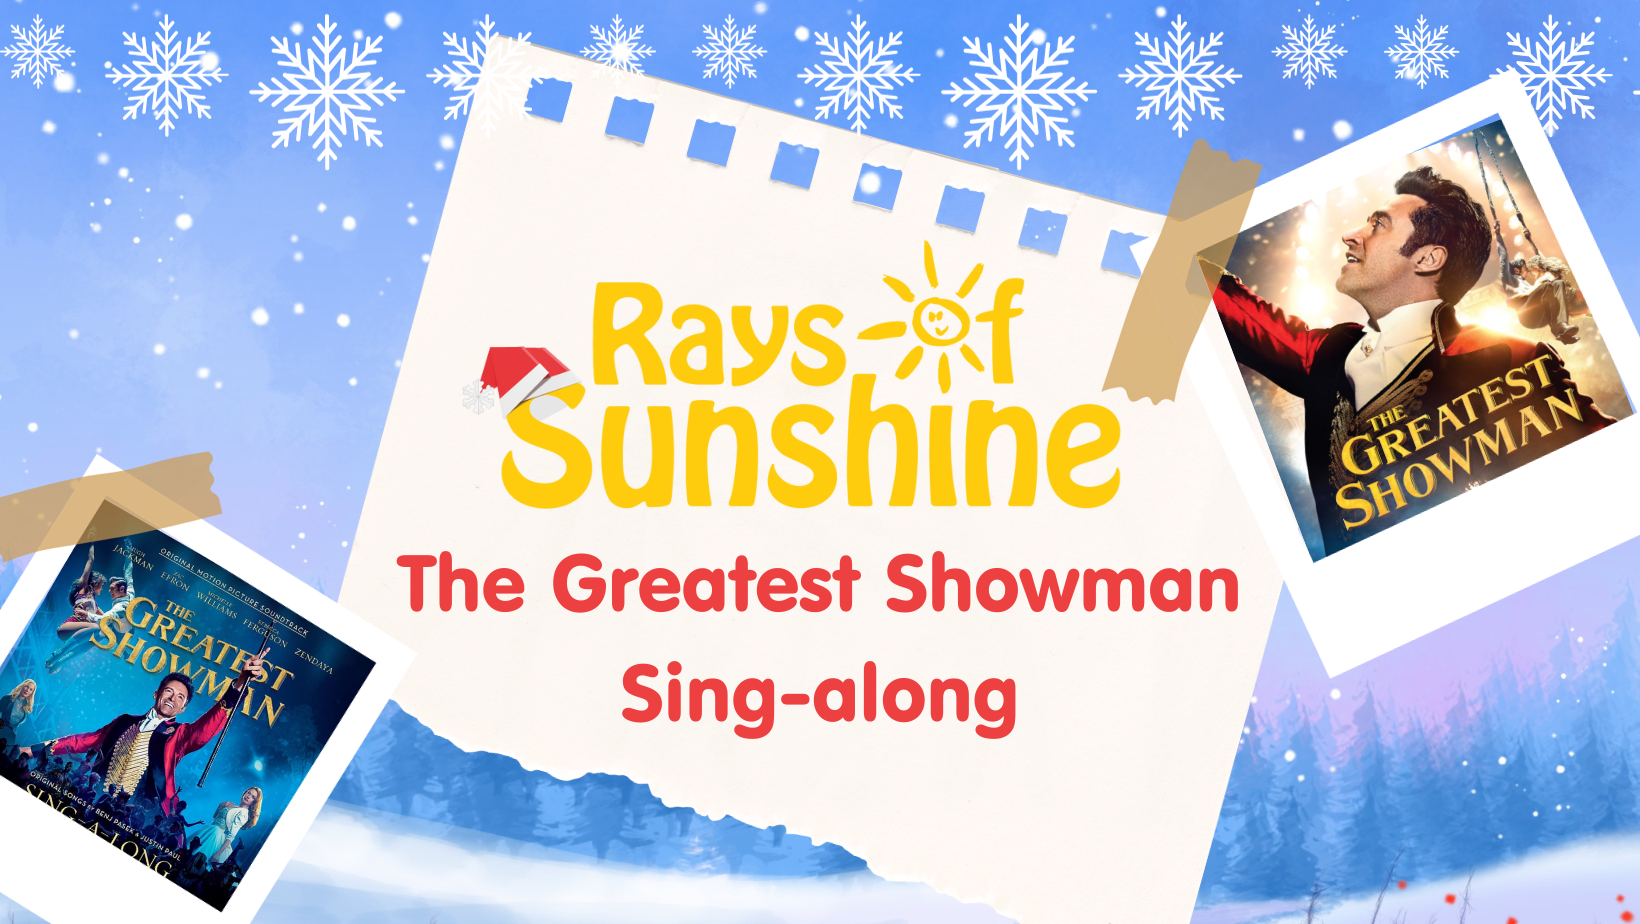 Christmas Rays of Sunshine logo with The Greatest Showman Sing-a-Long text